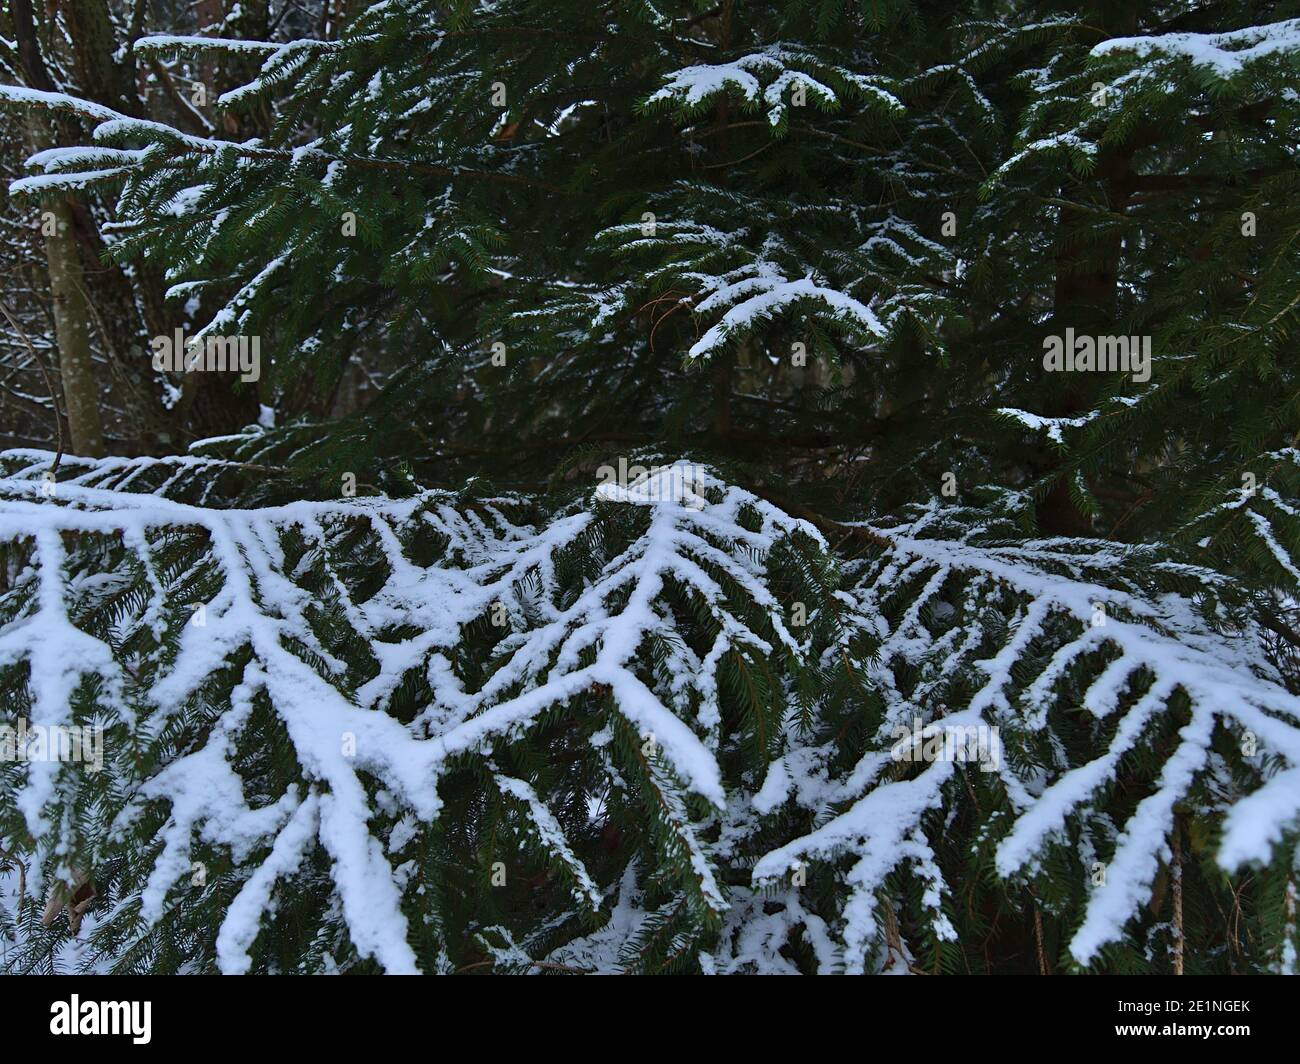 Closeup view of coniferous fir tree with branches and green colored sharp needles covered by snow in a forest near Gruibingen, Swabian Alb, Germany. Stock Photo